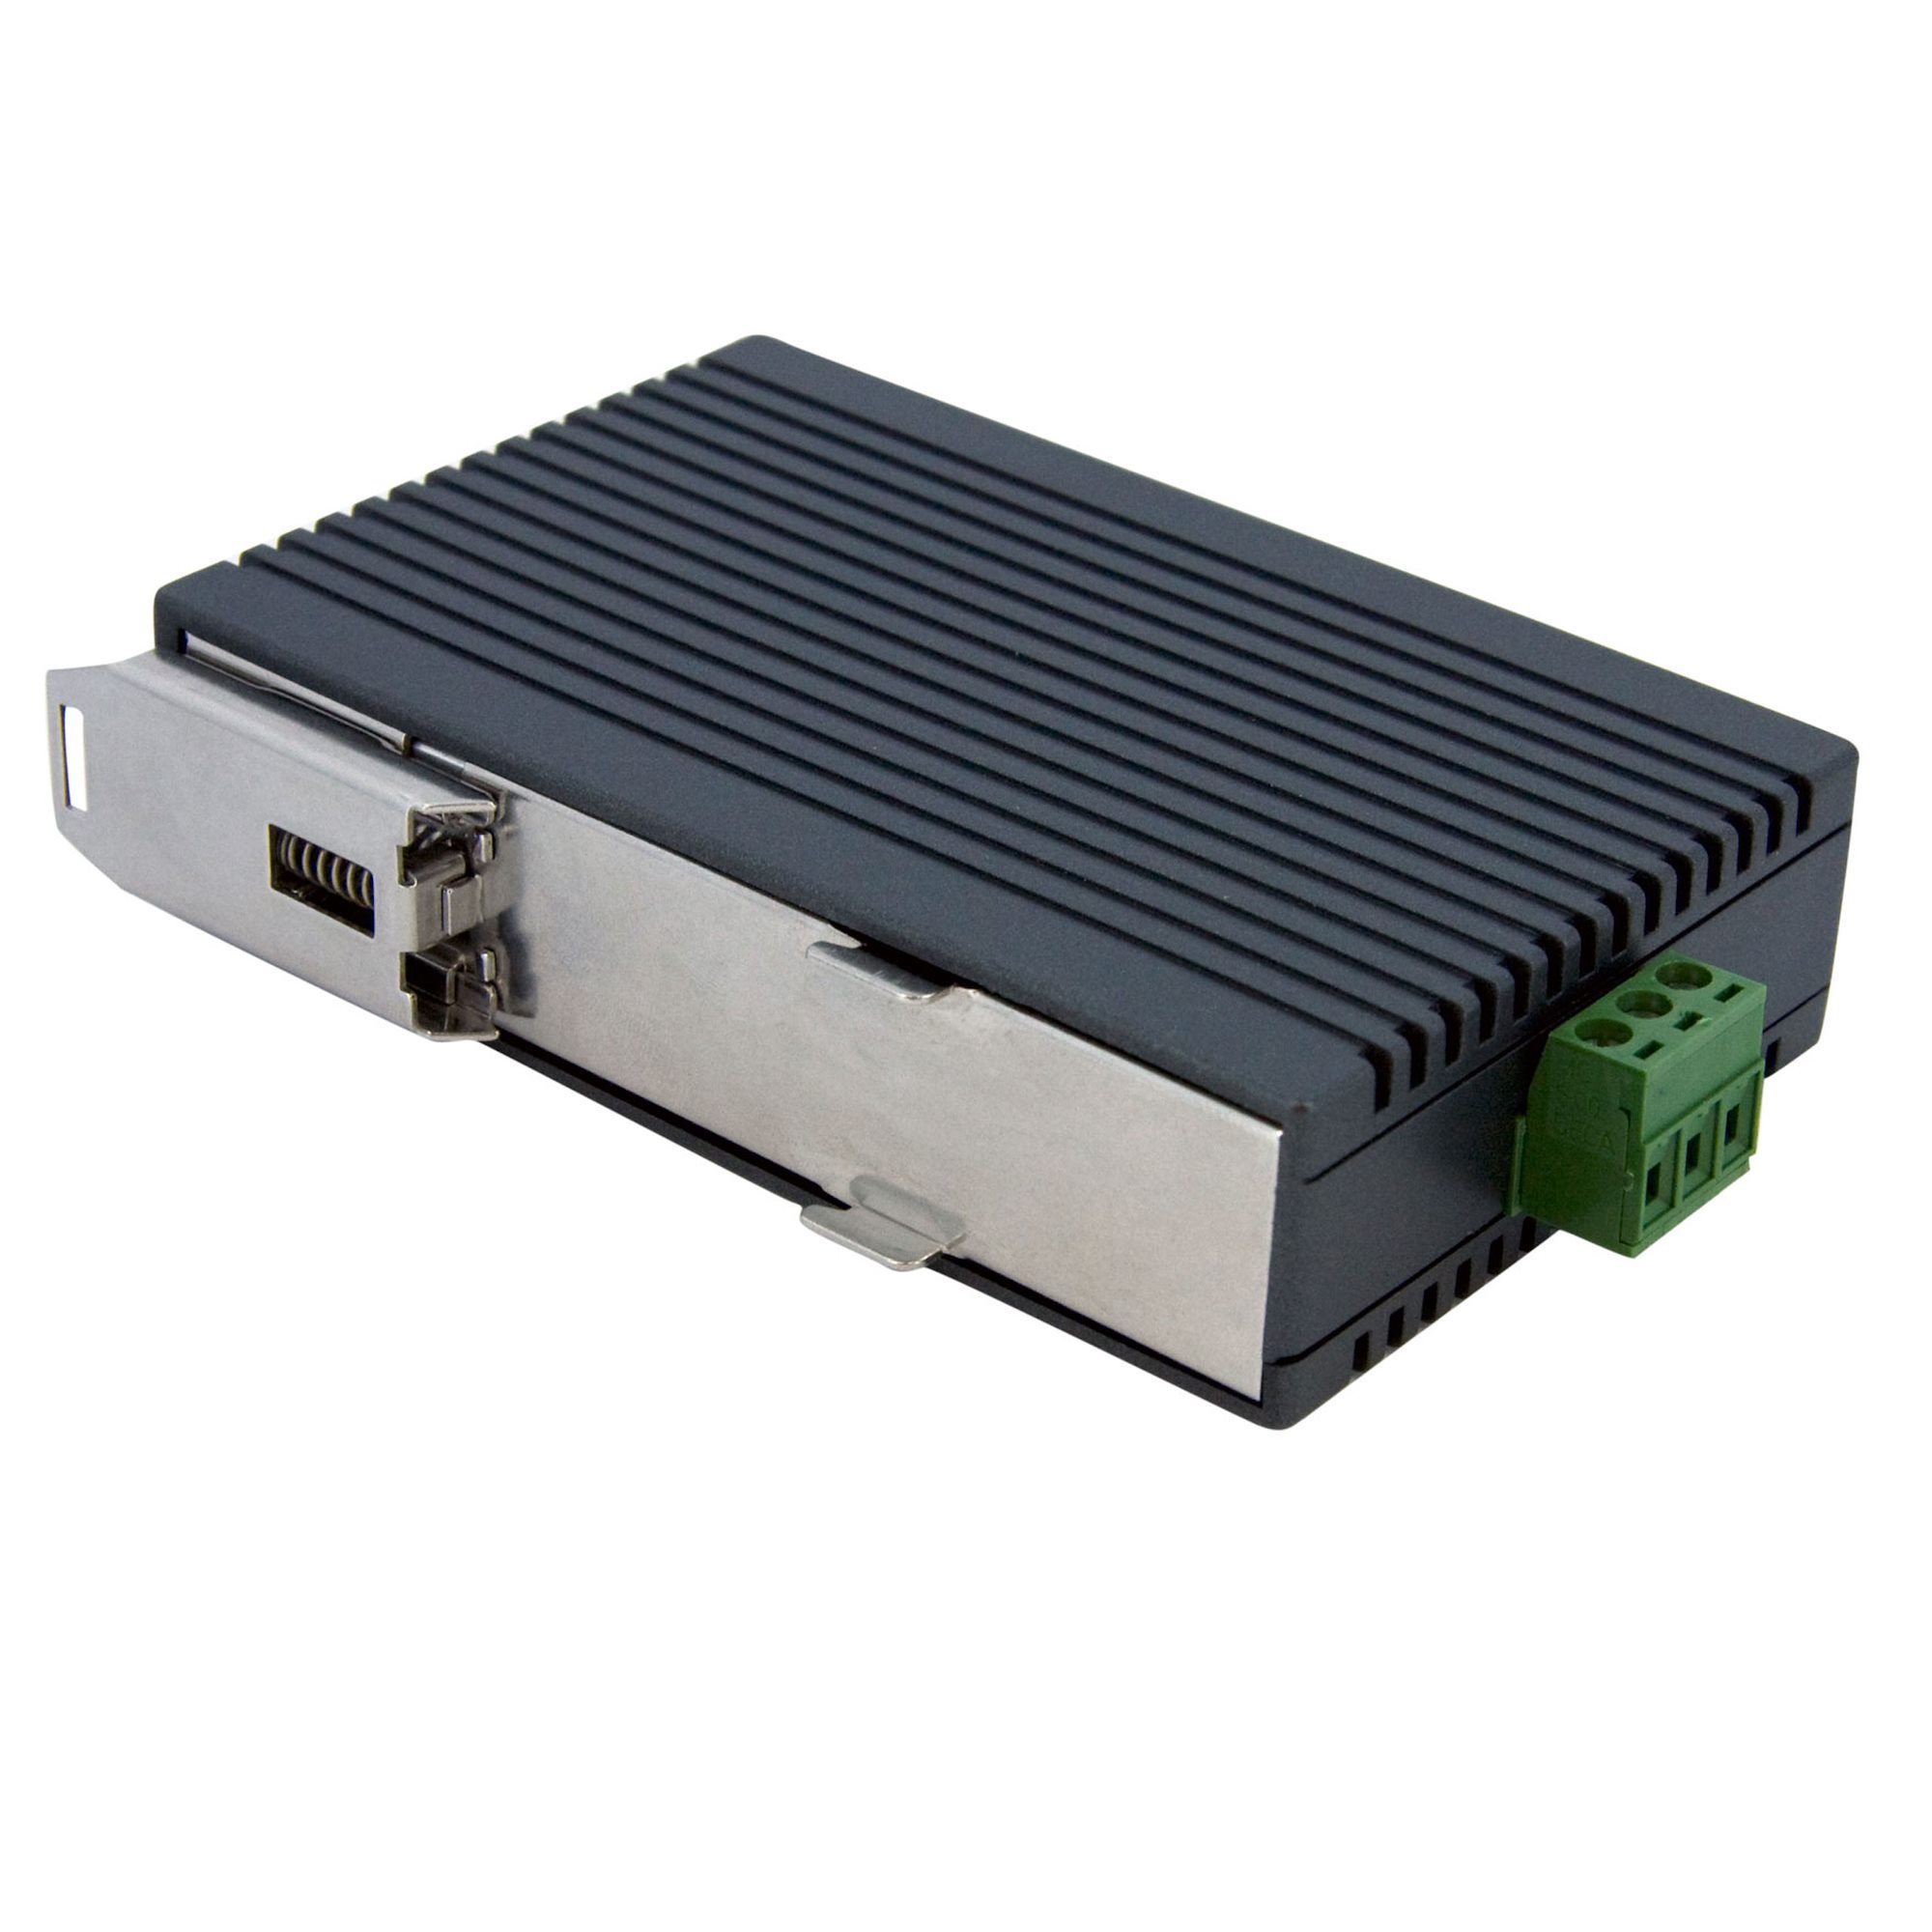 Home/Office Ethernet Switches Series - GS605v5, Home/Office Ethernet  Switches, Switches, Networking, Home